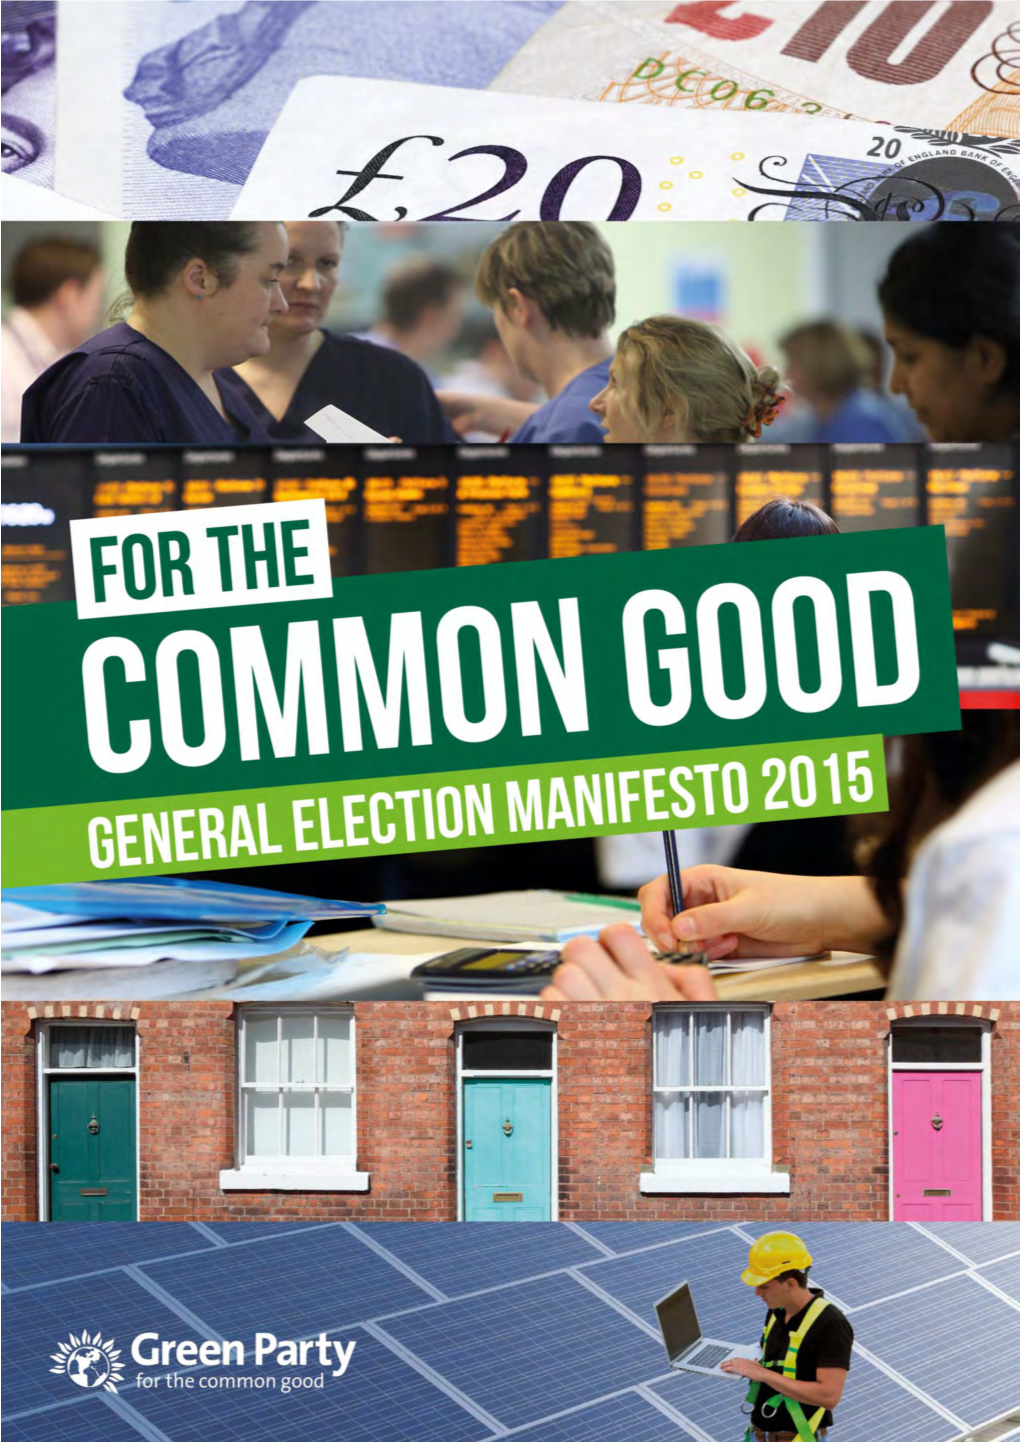 Green Party General Election Manifesto 2015 1 © the Green Party of England and Wales 2015